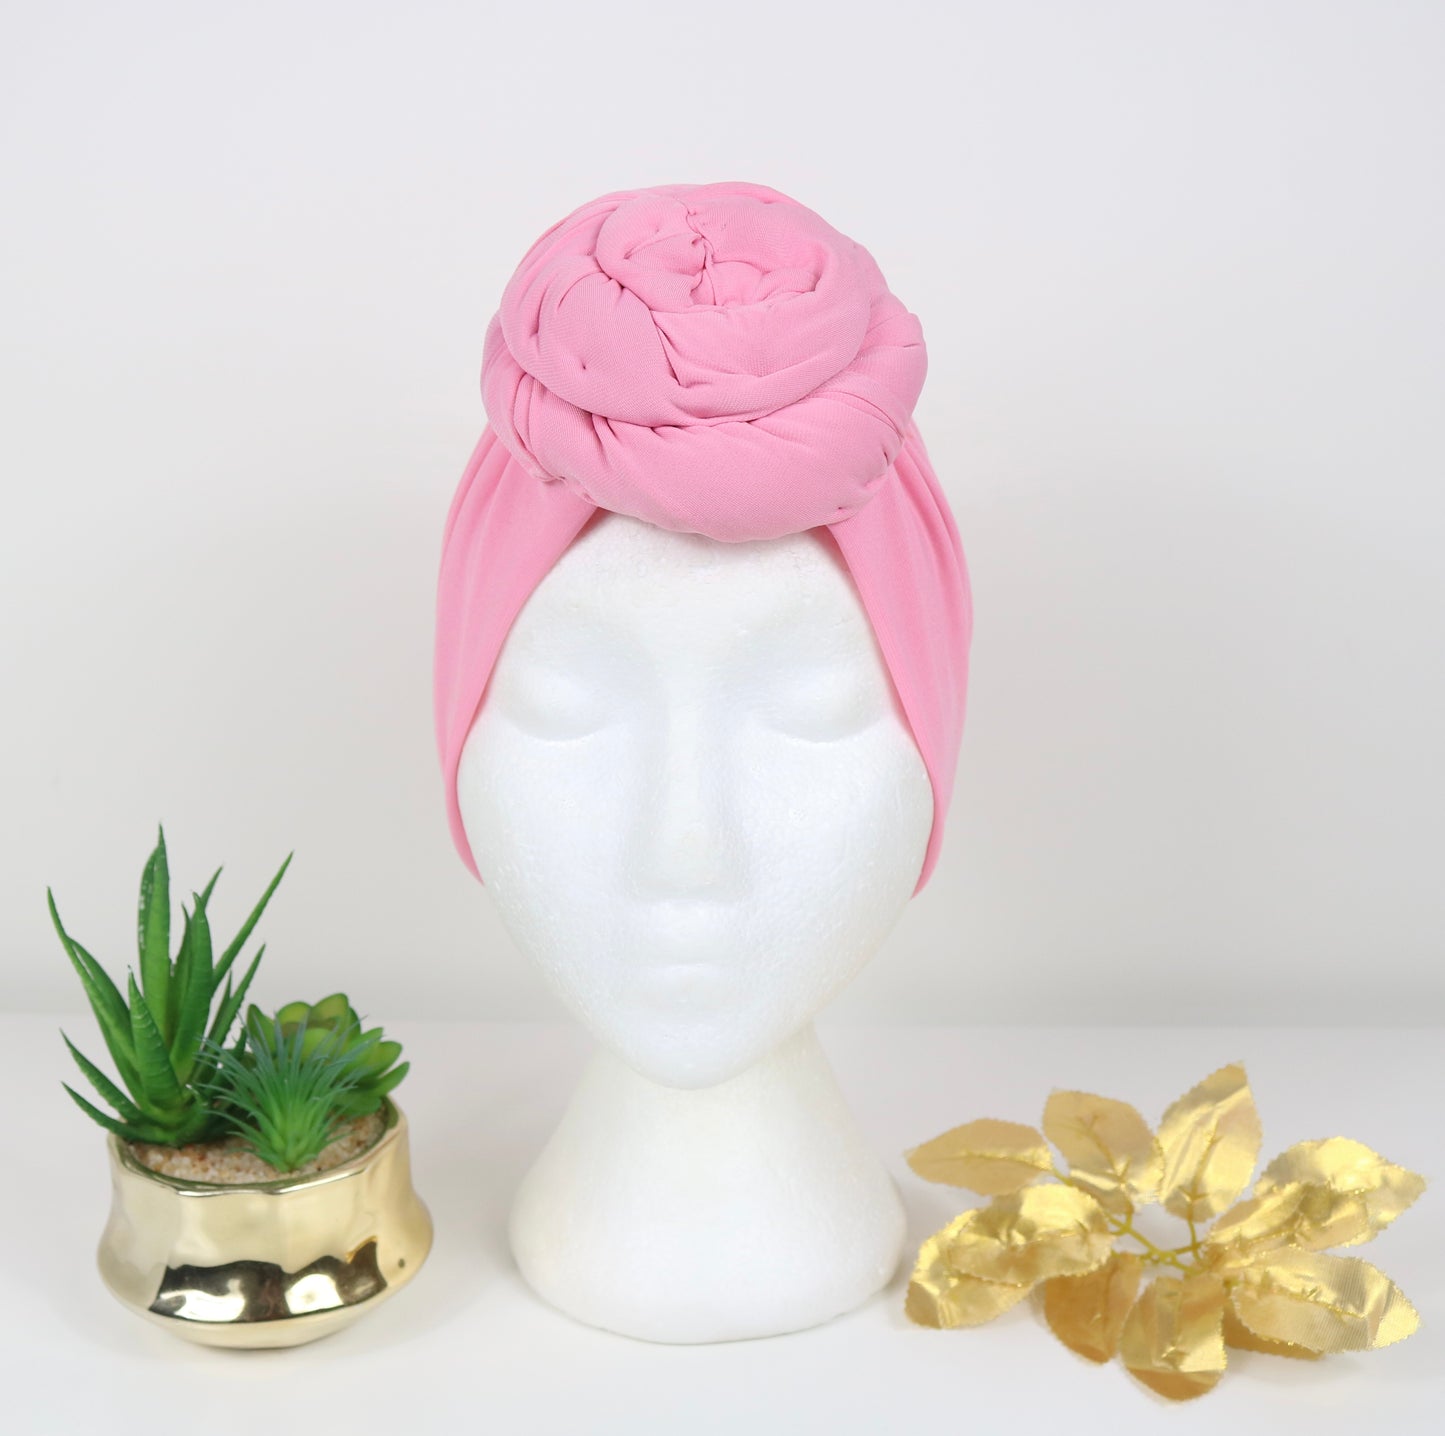 Pink Friday - Full coverage Turban